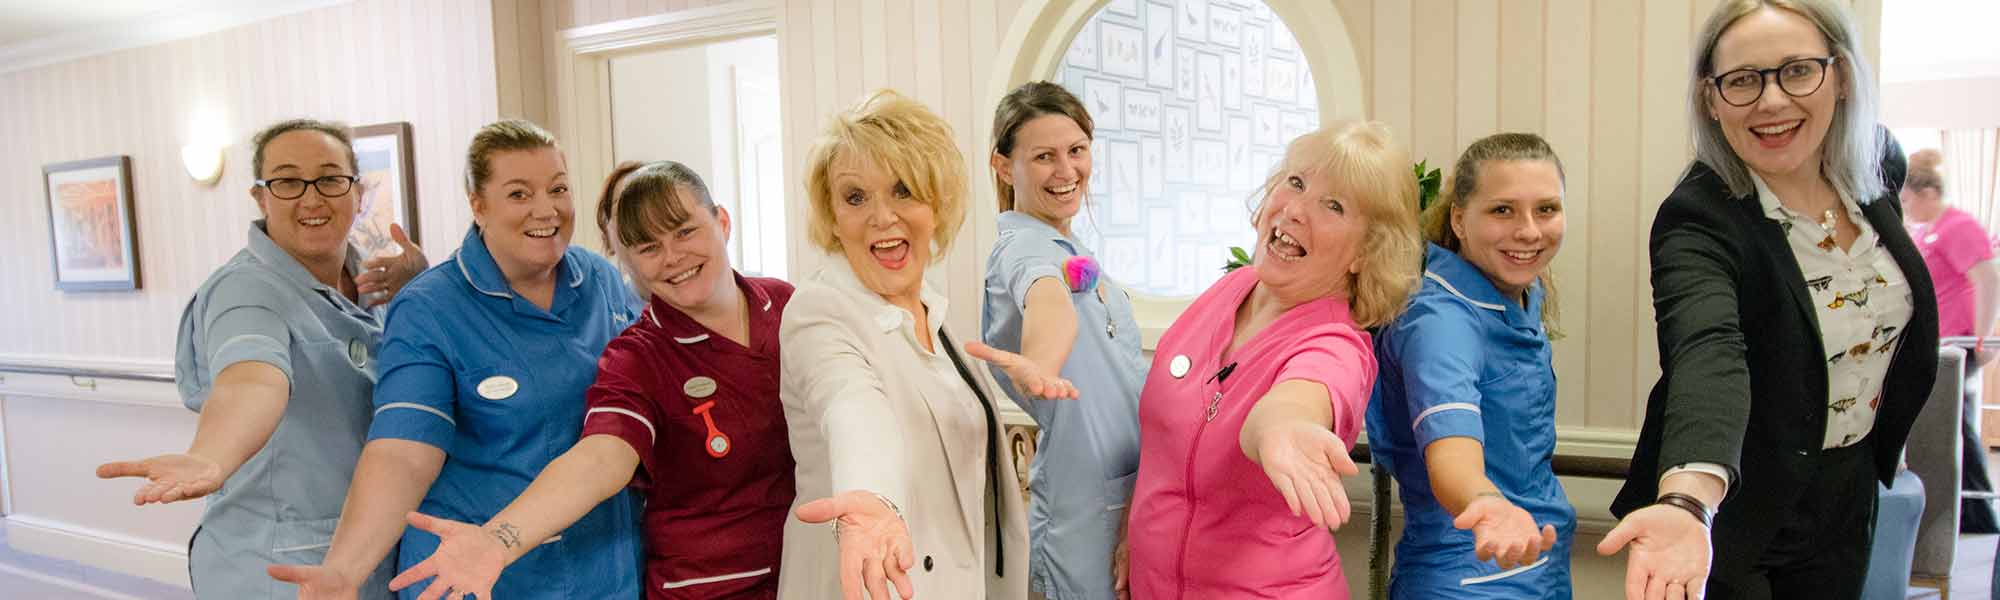 Seagrave House Care Home Sherrie Hewson Coffee Lounge Staff Smiles jazz hands banner hero